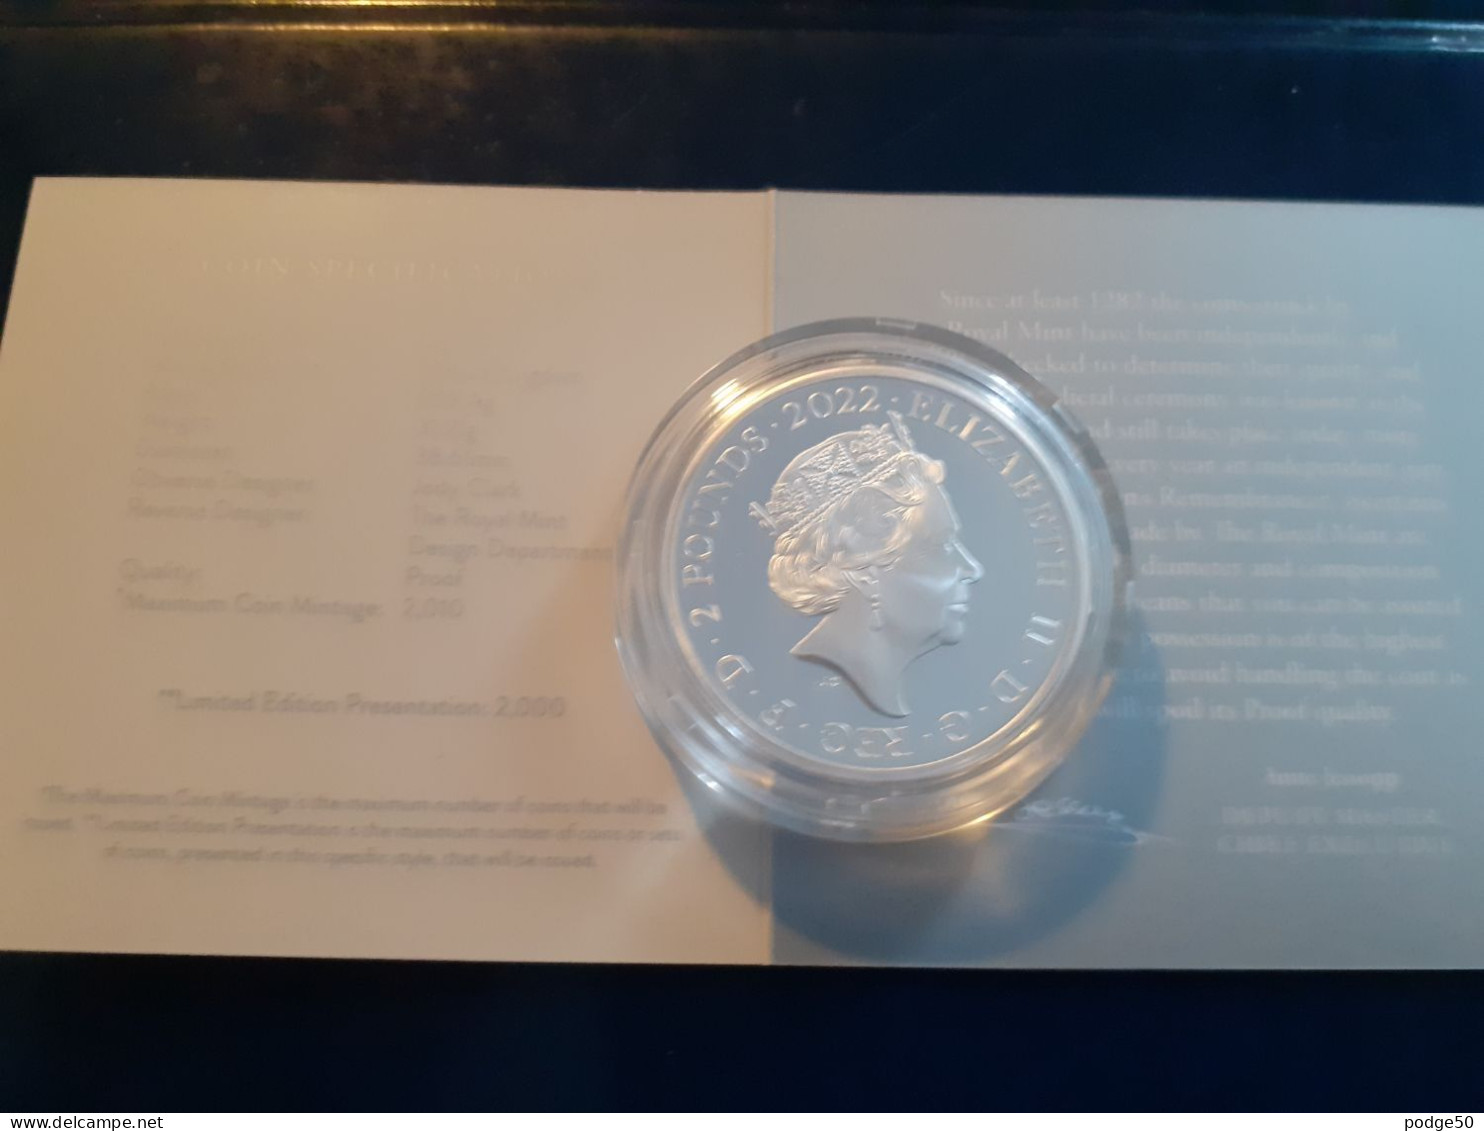 2022 CITY VIEWS OF ROME 1oz SILVER PROOF £2 IN ROYAL MINT PACKAGING ONLY 2000 ISSUED - Mint Sets & Proof Sets